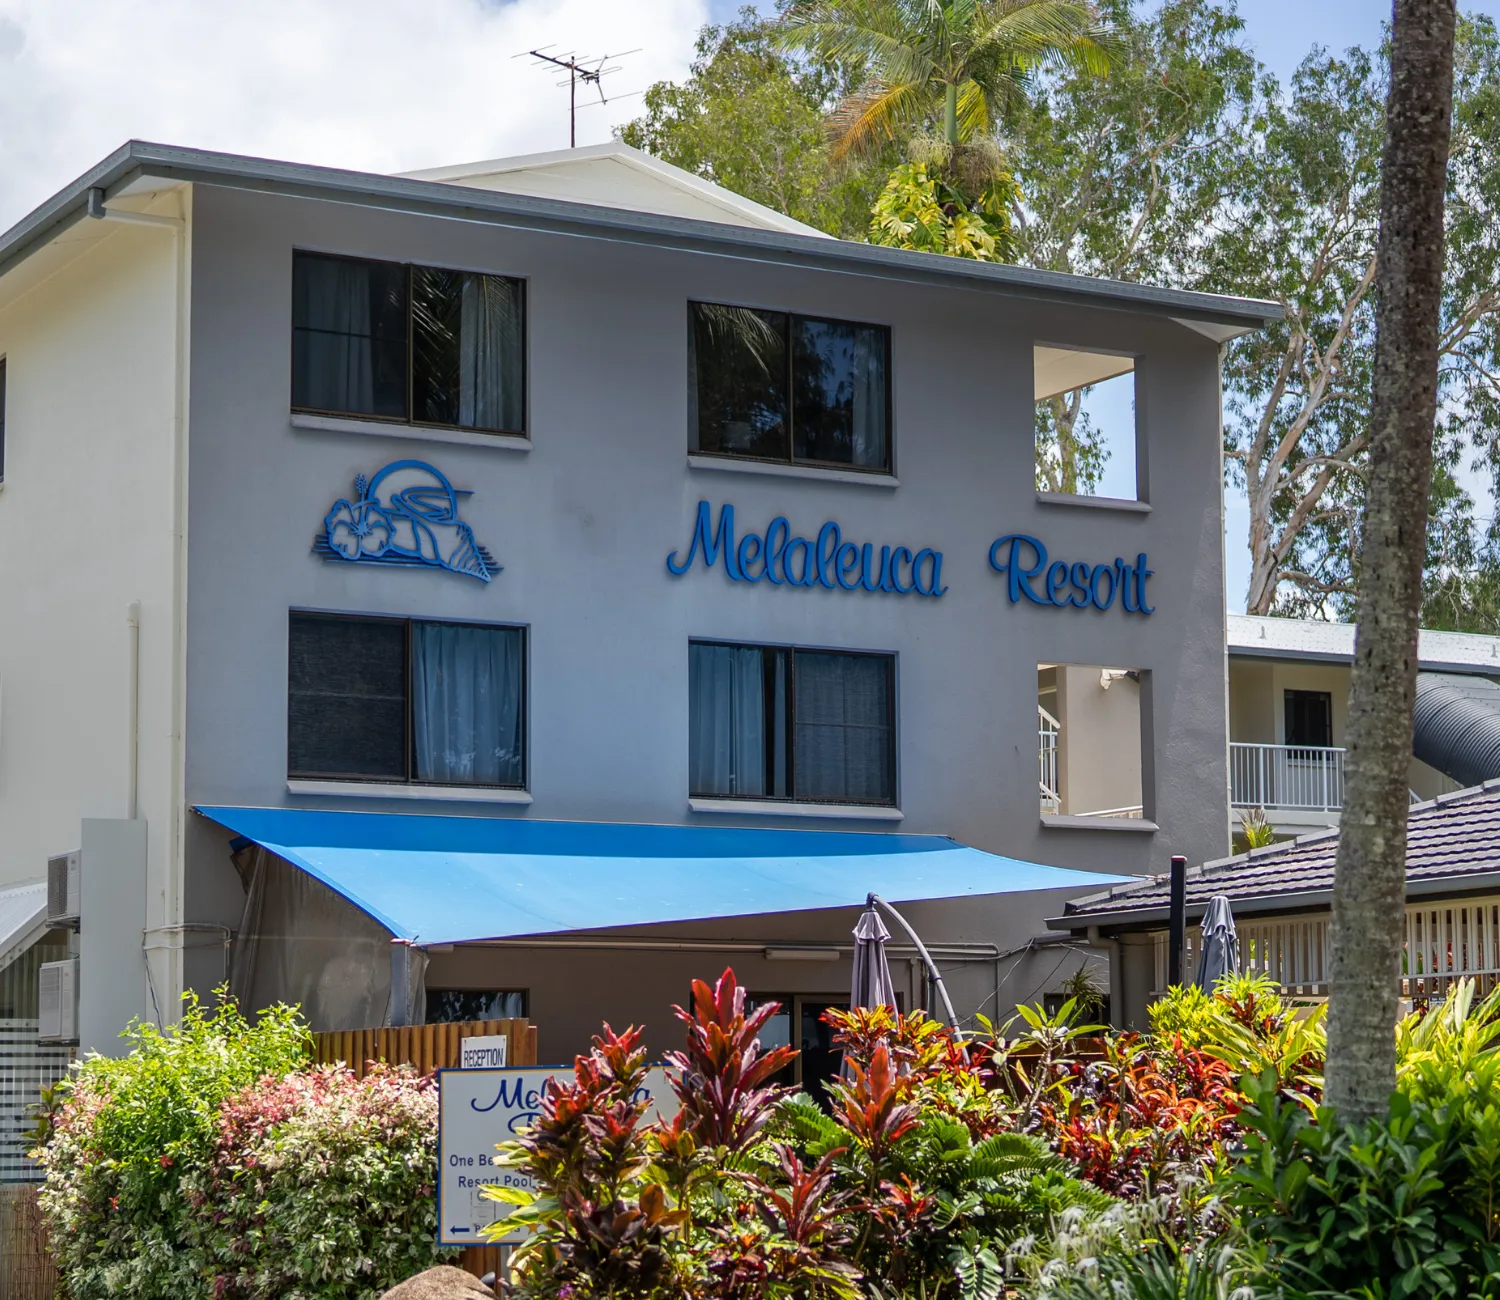 front of the Melaleuca Resort apartment block with signage and gardens